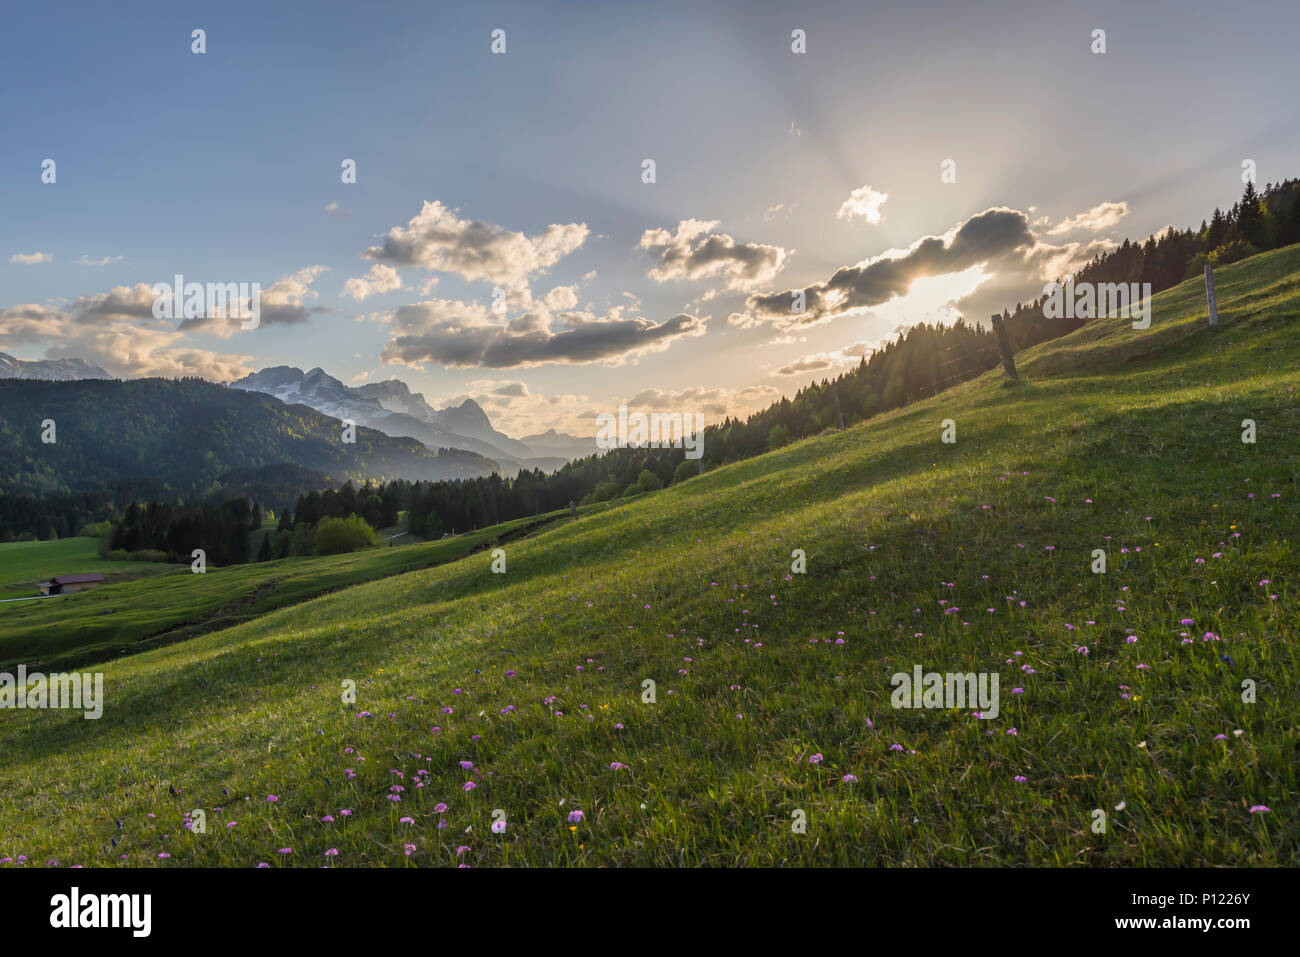 Mount Alpspitze, Mount Zugspitze and Waxenstein of the Wetterstein mountains with clouds just before sunset, Bavaria, Germany Stock Photo